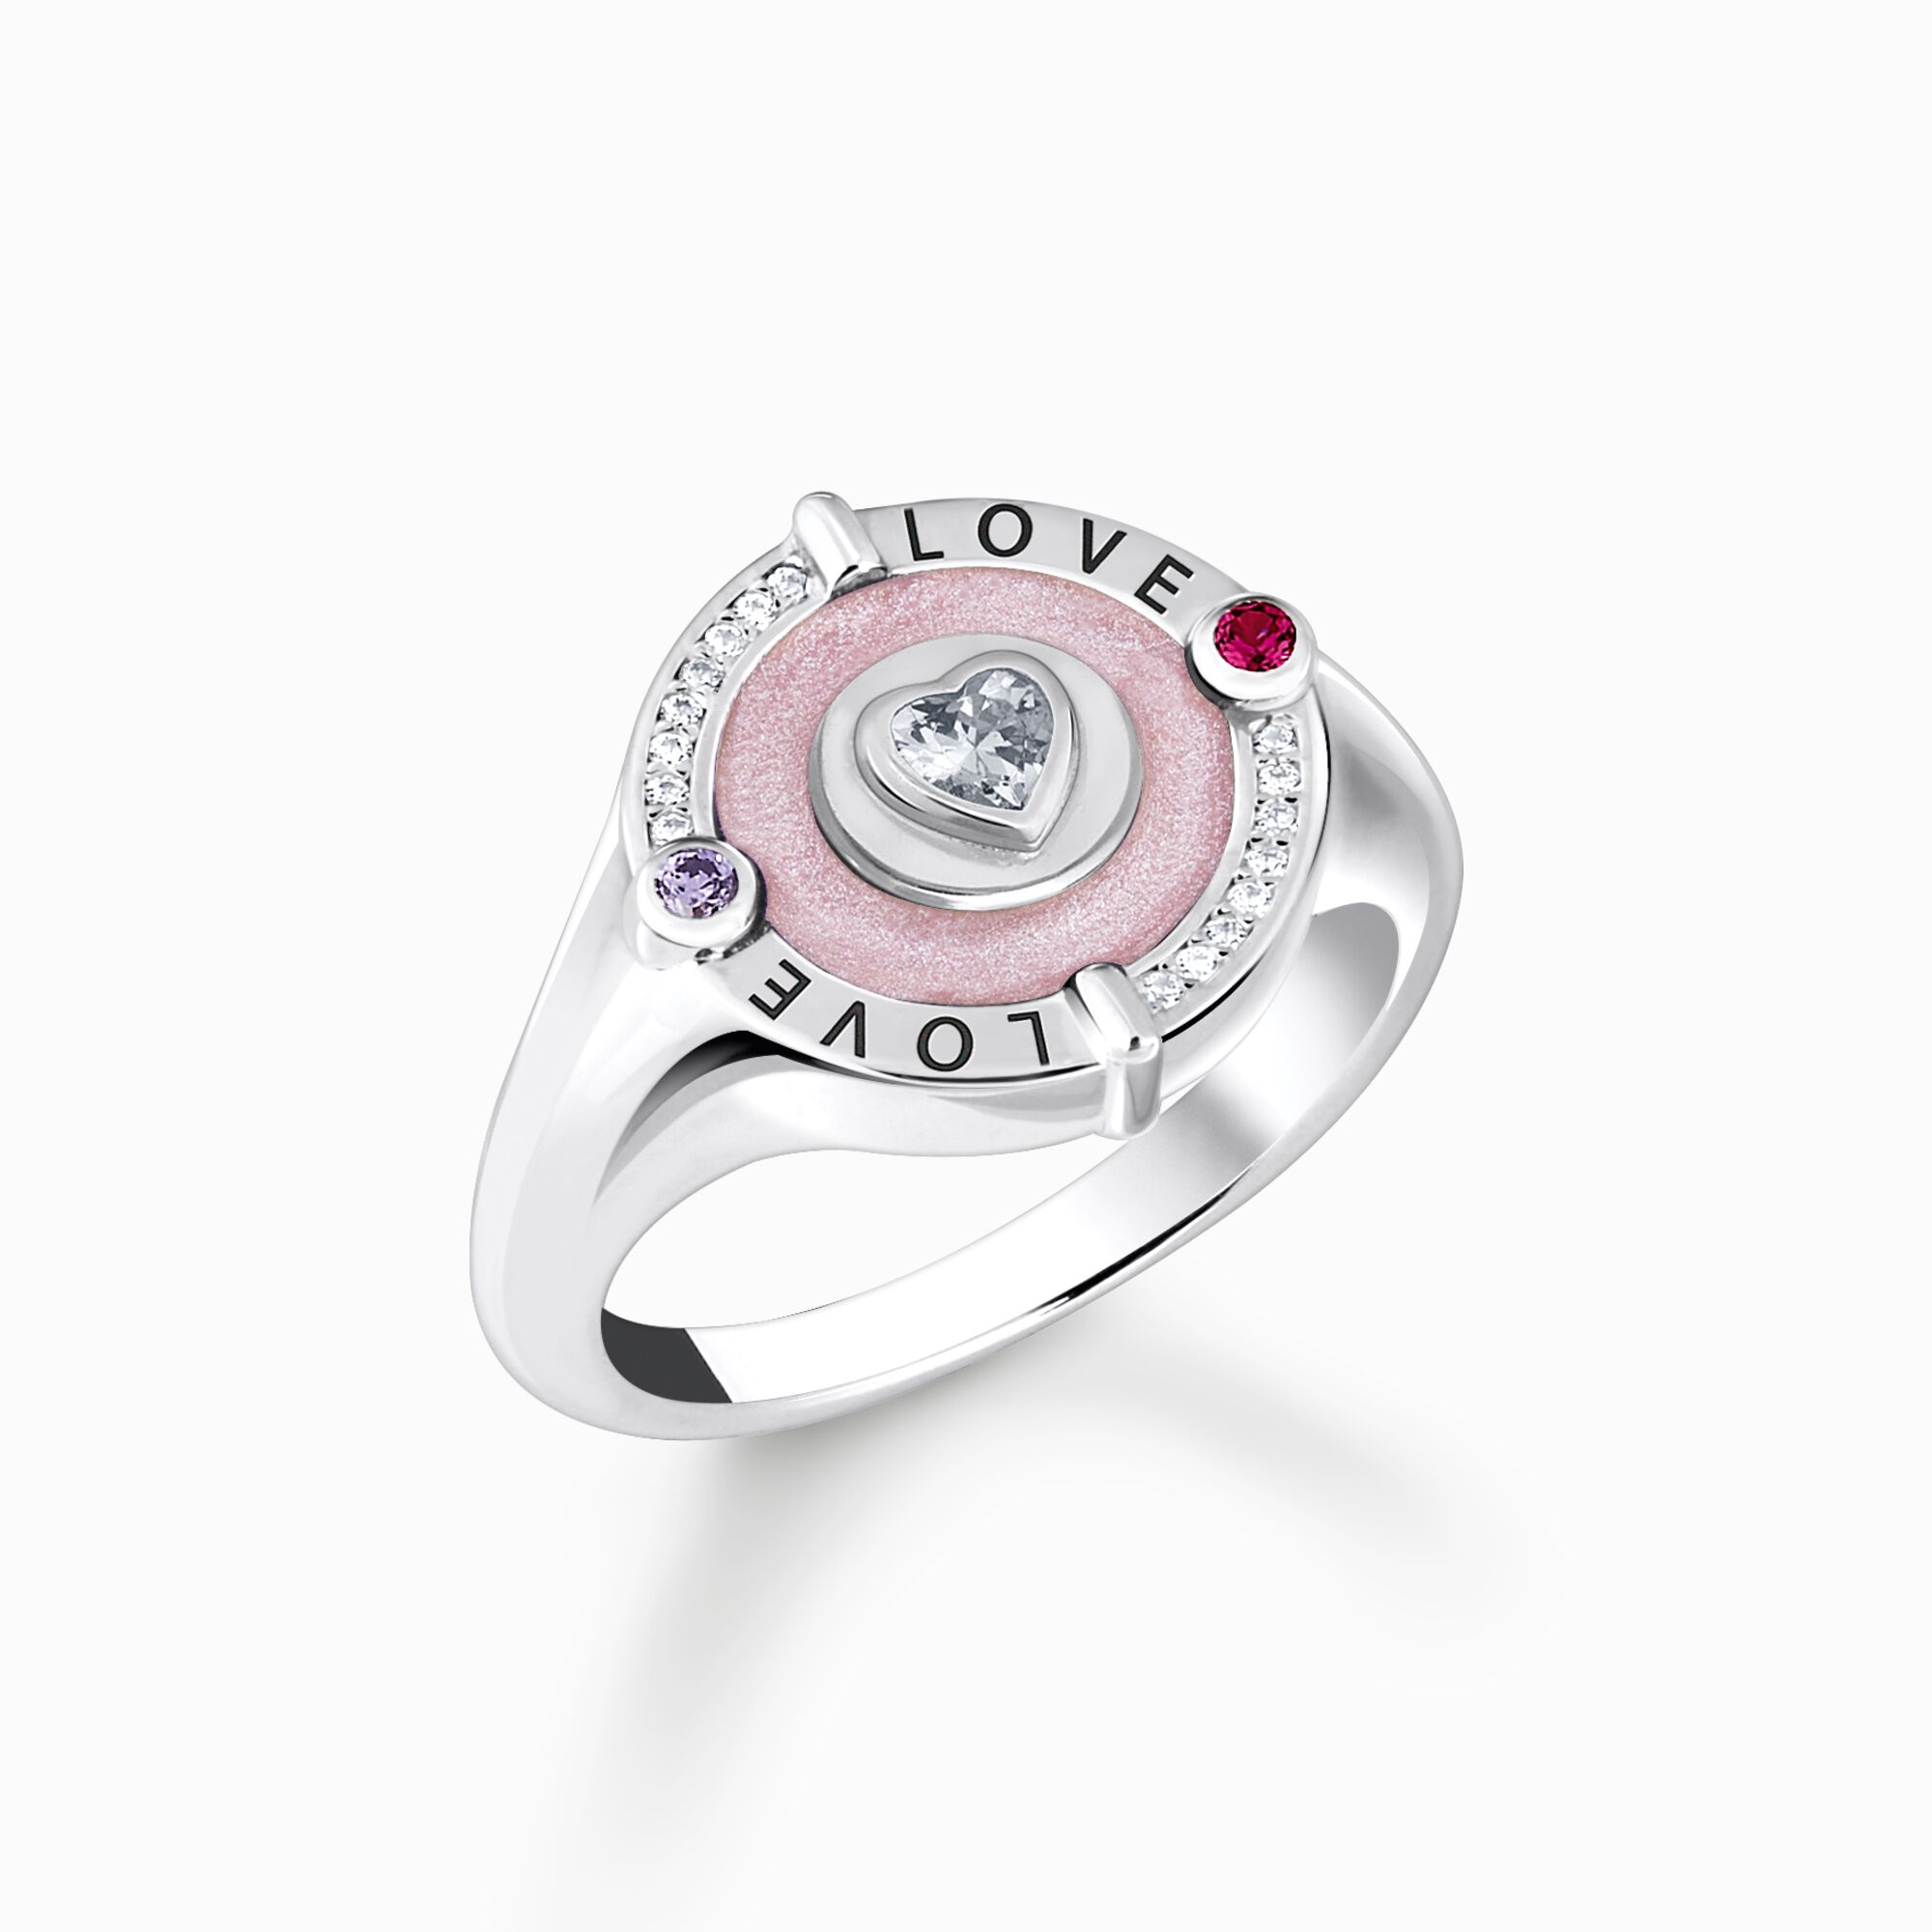 Silver signet ring with stones and pinkish cold enamel from the  collection in the THOMAS SABO online store